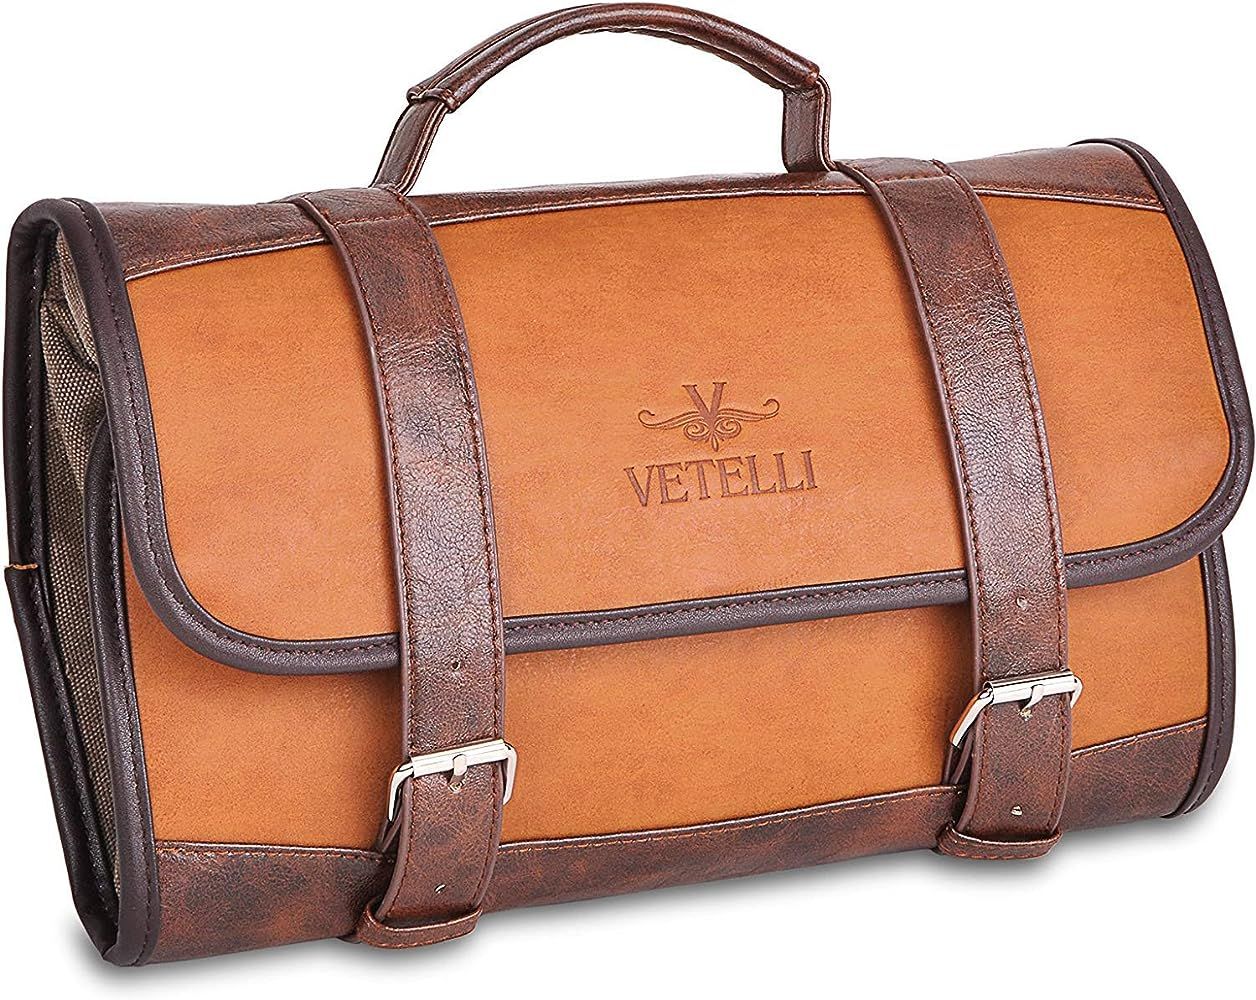 Vetelli Hanging Leather Toiletry Bag for Men, Perfect For Travel and a Fantastic Gift | Amazon (US)